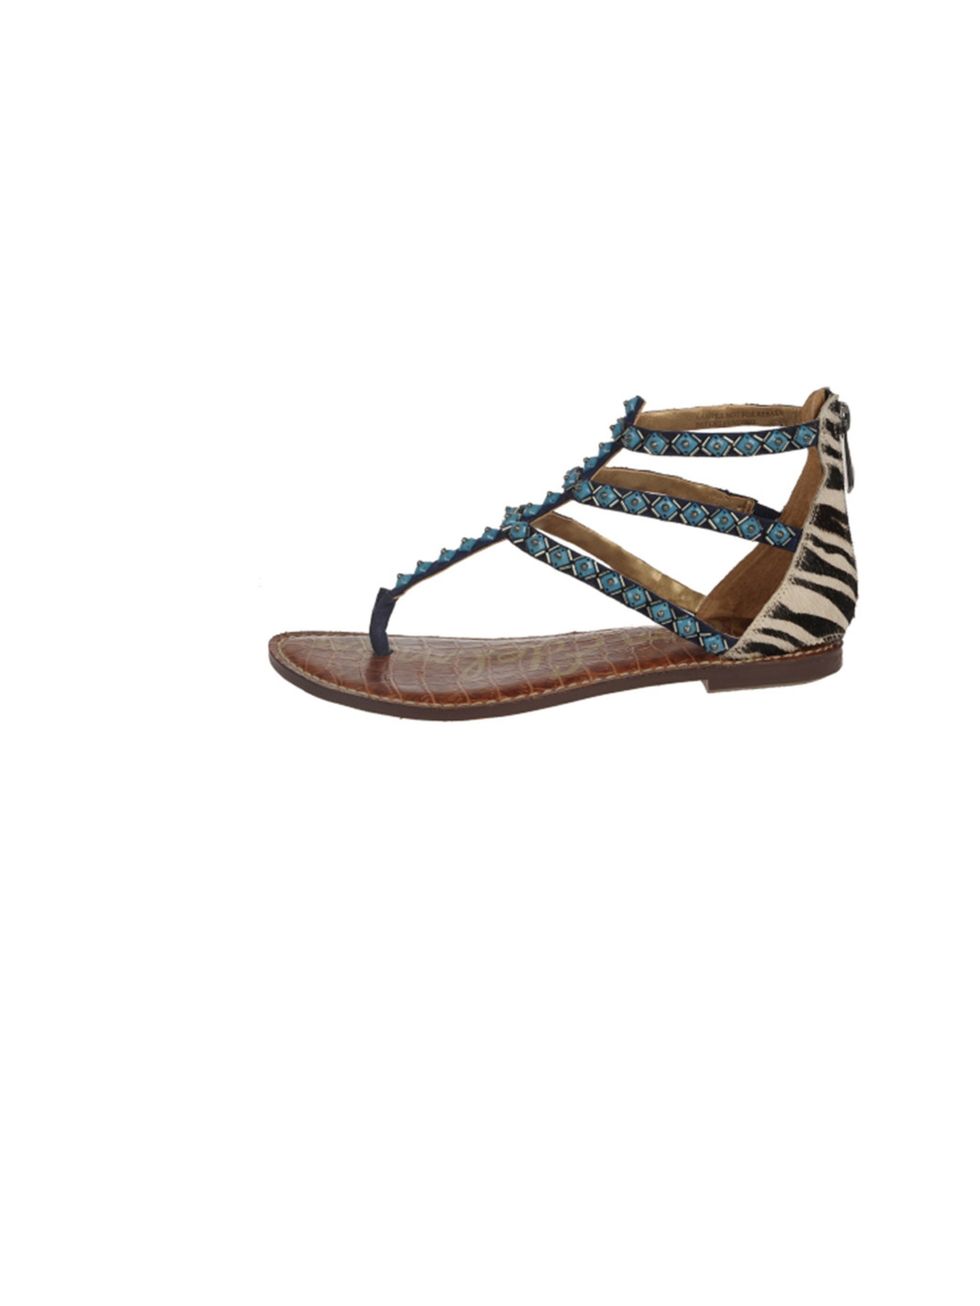 <p>Put a spring in your step with Sam Edelman's boho-chic, embellished sandals. </p><p>Gladiator sandals, from <a href="http://www.samedelman.com/collection/shoes/sandals1/greyson/">Sam Edelman</a></p>